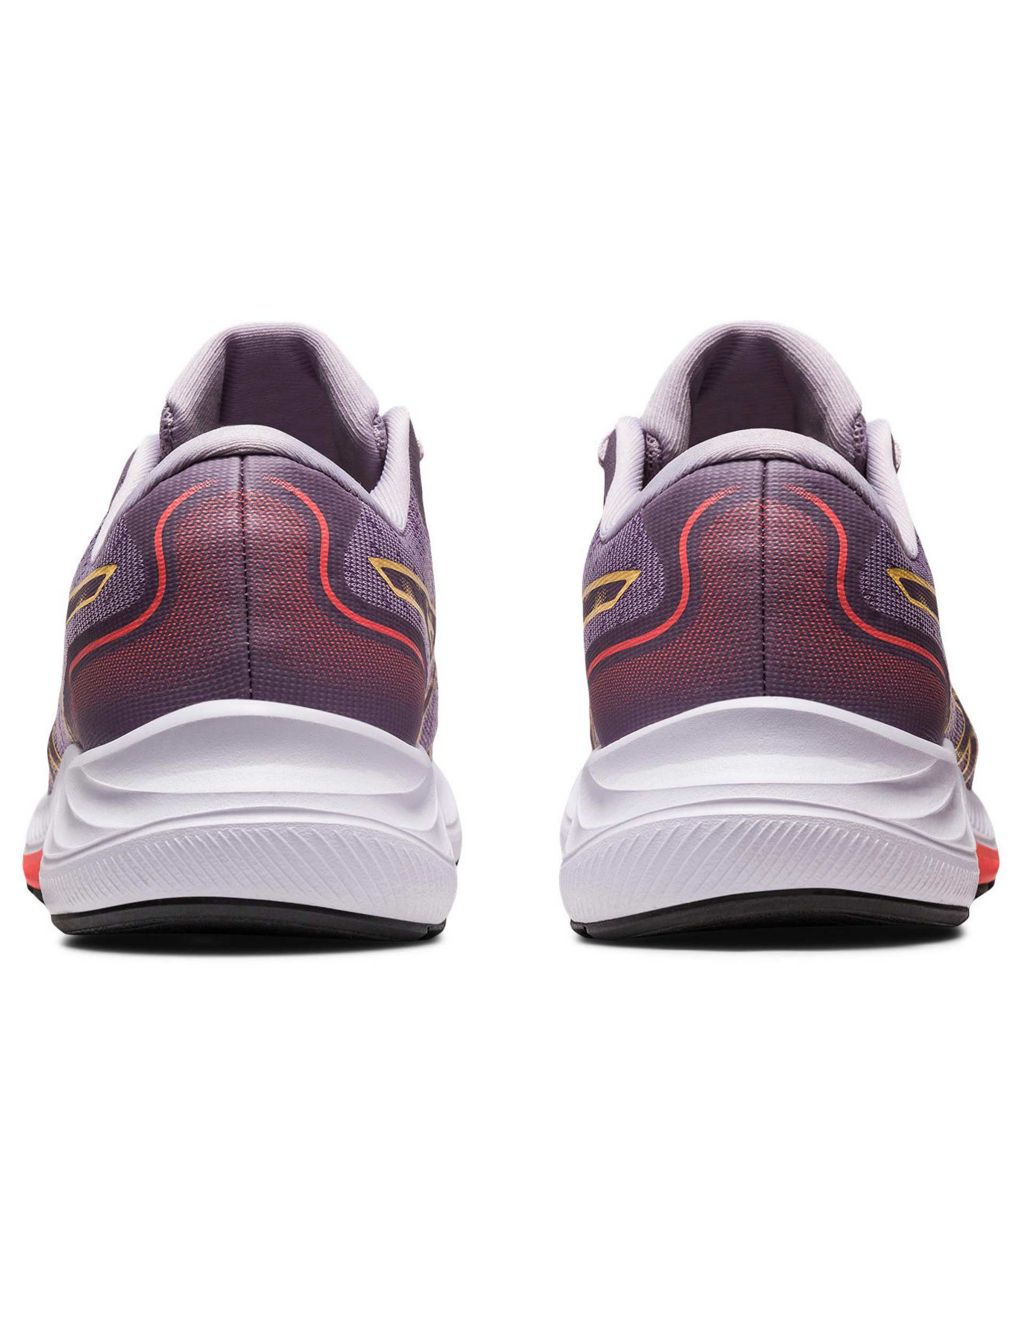 GEL™- Excite 9 Lace Up Trainers image 4